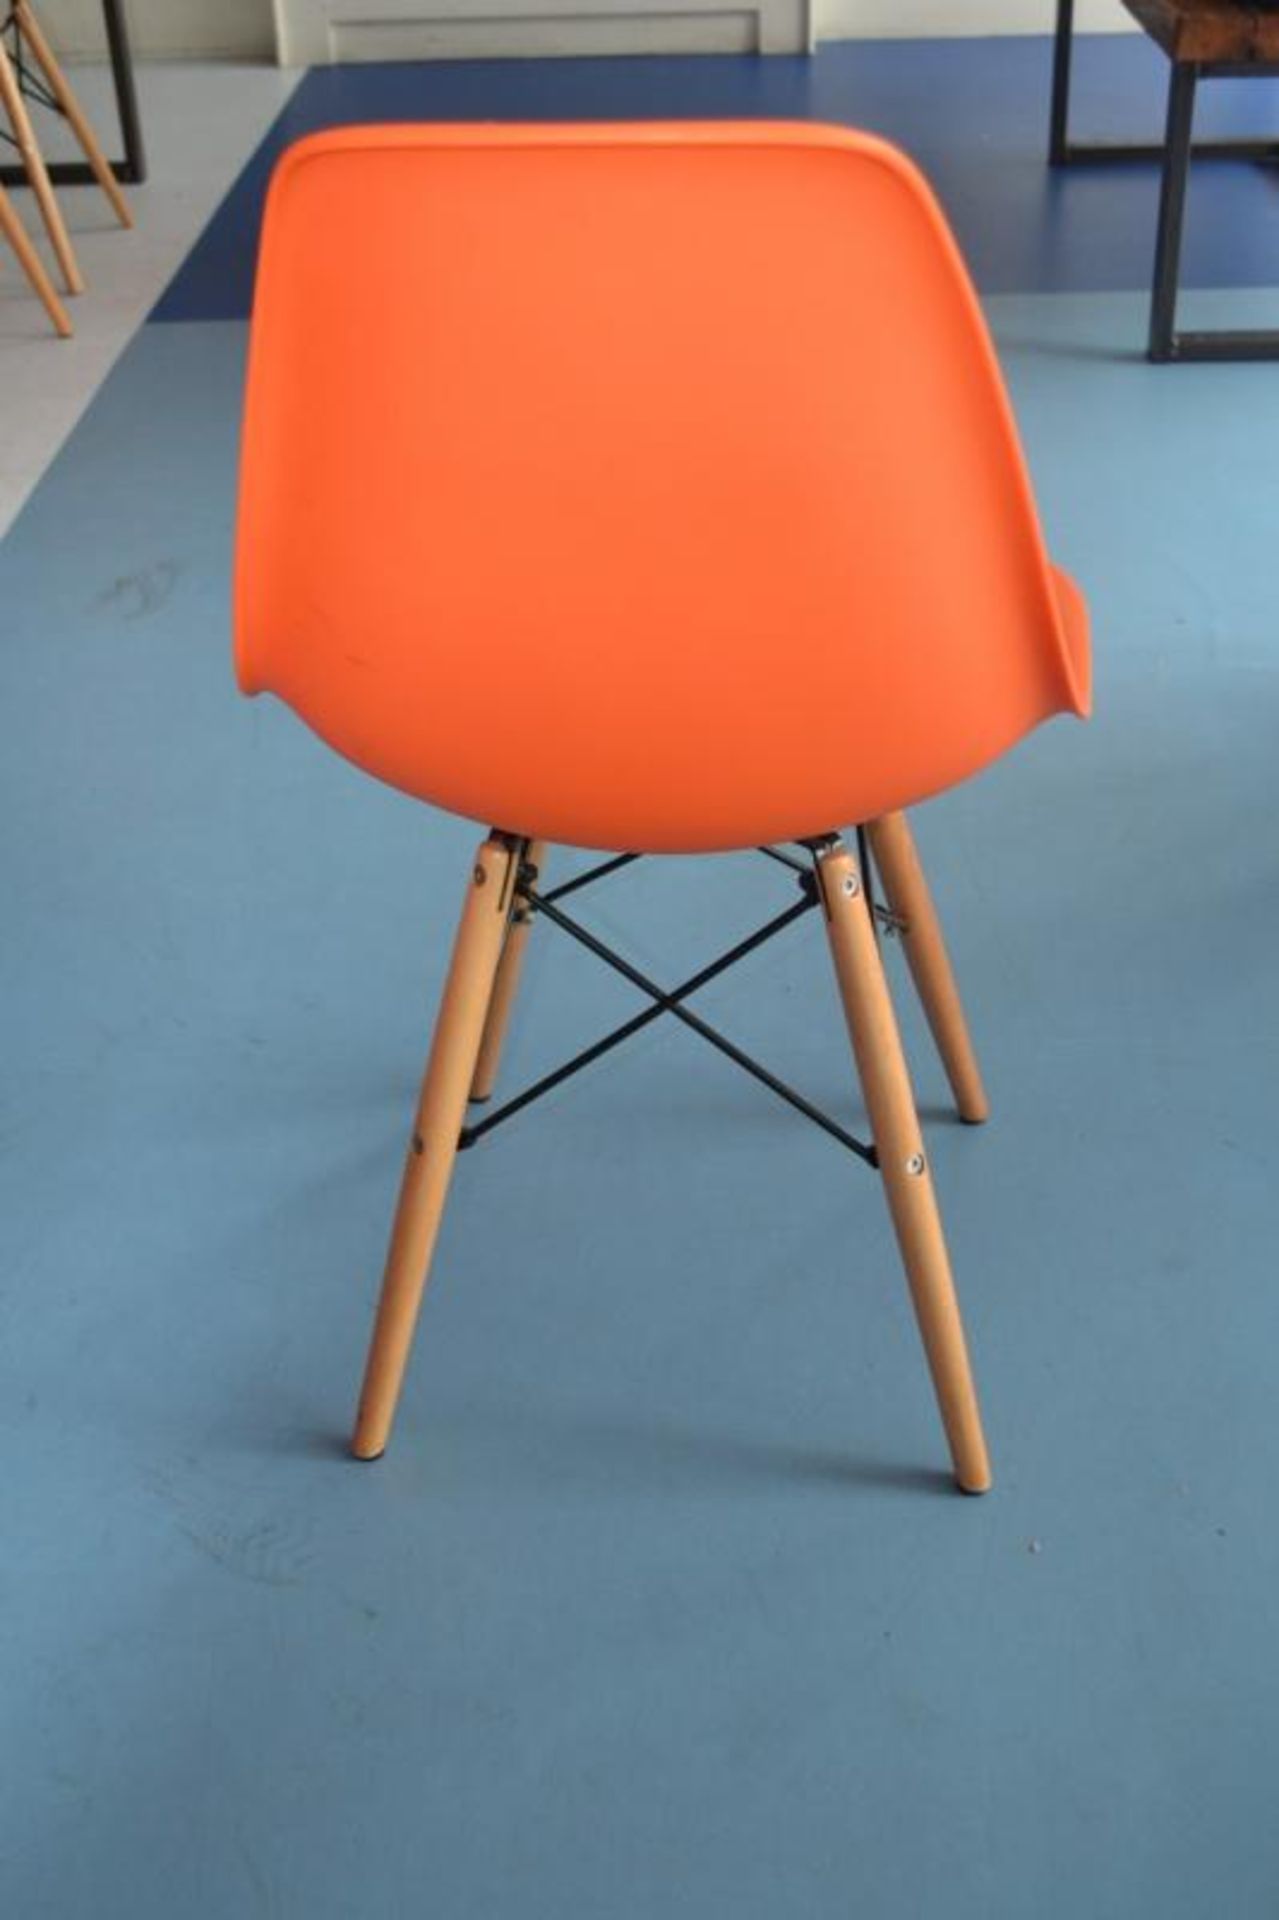 12 x Children's Red and Orange Charles and Ray Eames Style Shell Chairs - CL425 - Location: Altrinch - Image 5 of 9